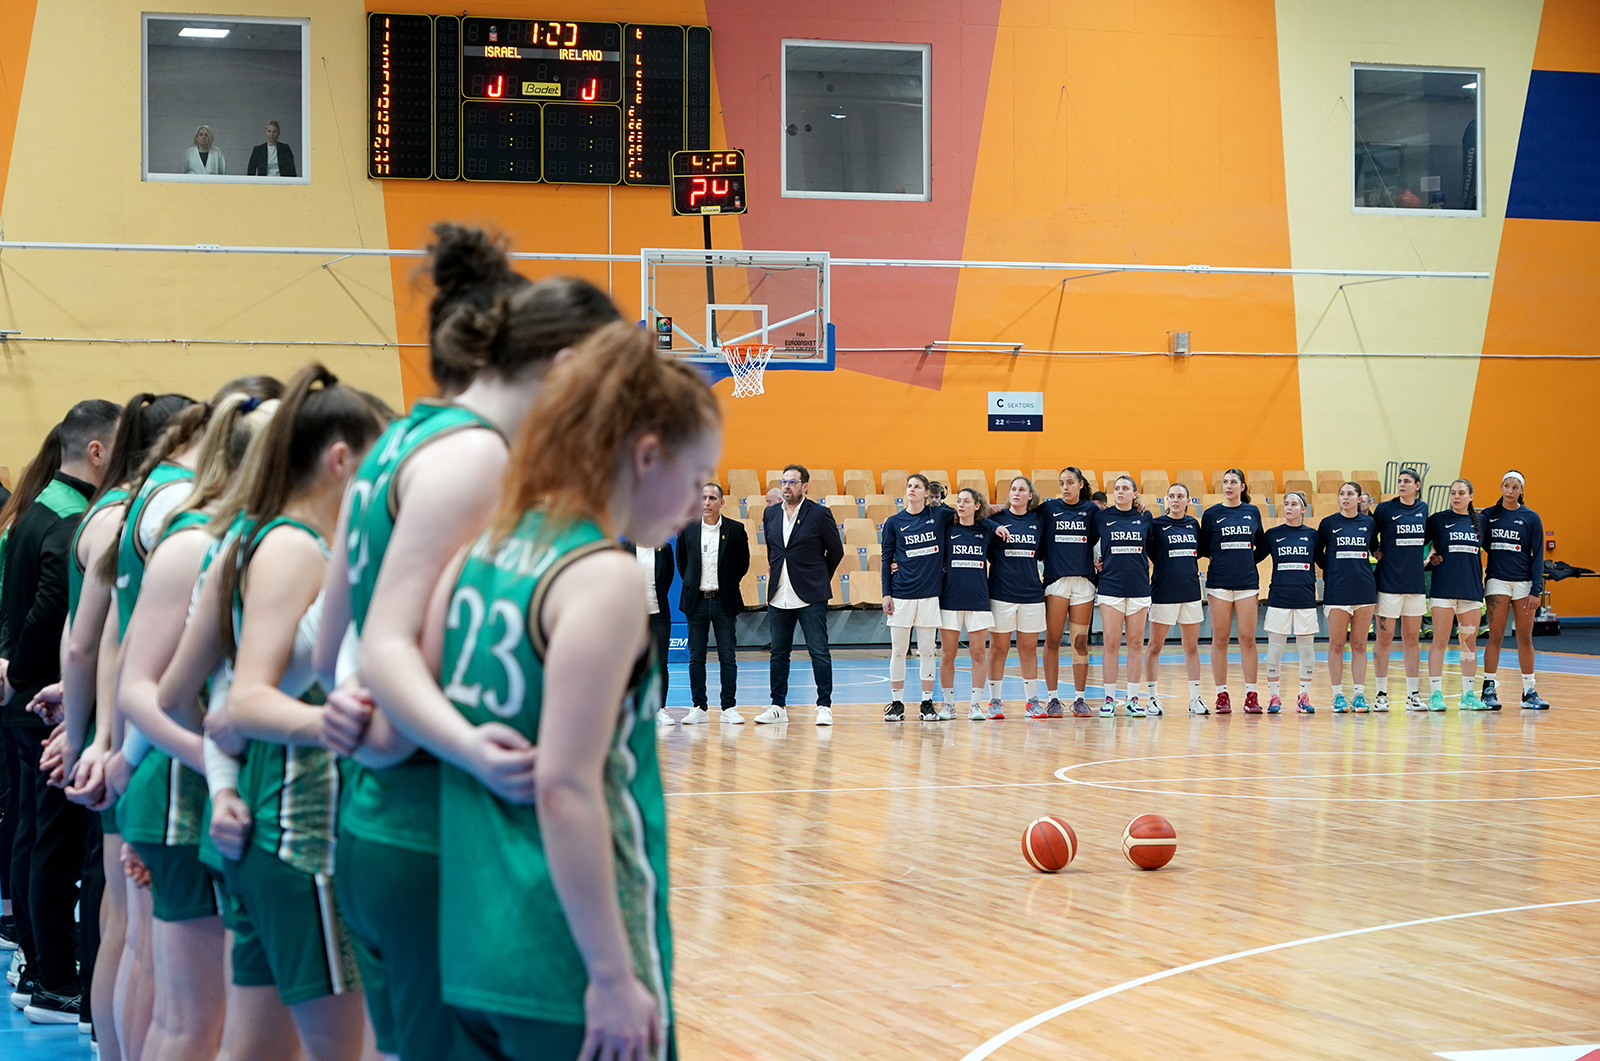 The Ireland team and Israel team before the FIBA Women's EuroBasket Championship Qualifier match at the Rimi Olympic Centre in Riga, Latvia on February 8.